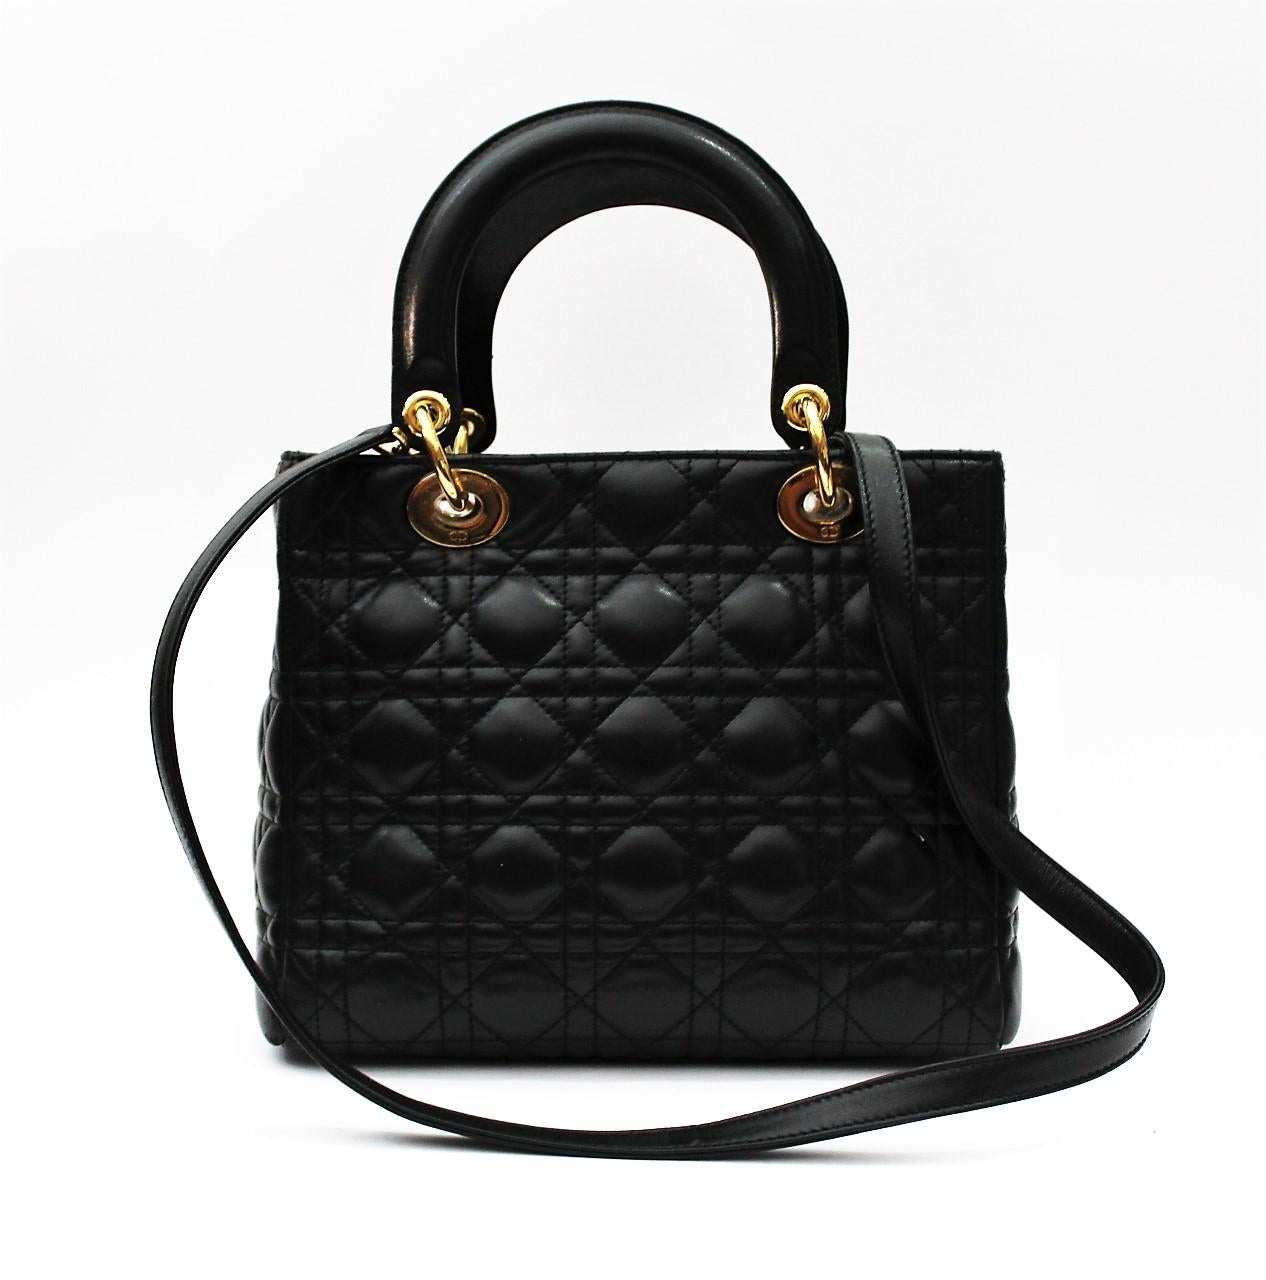 Lady Dior Lambskin Black Leather 
Gold Hardware 
Stitching Cannage
Dimensions: 24 x 20 x 11 cm